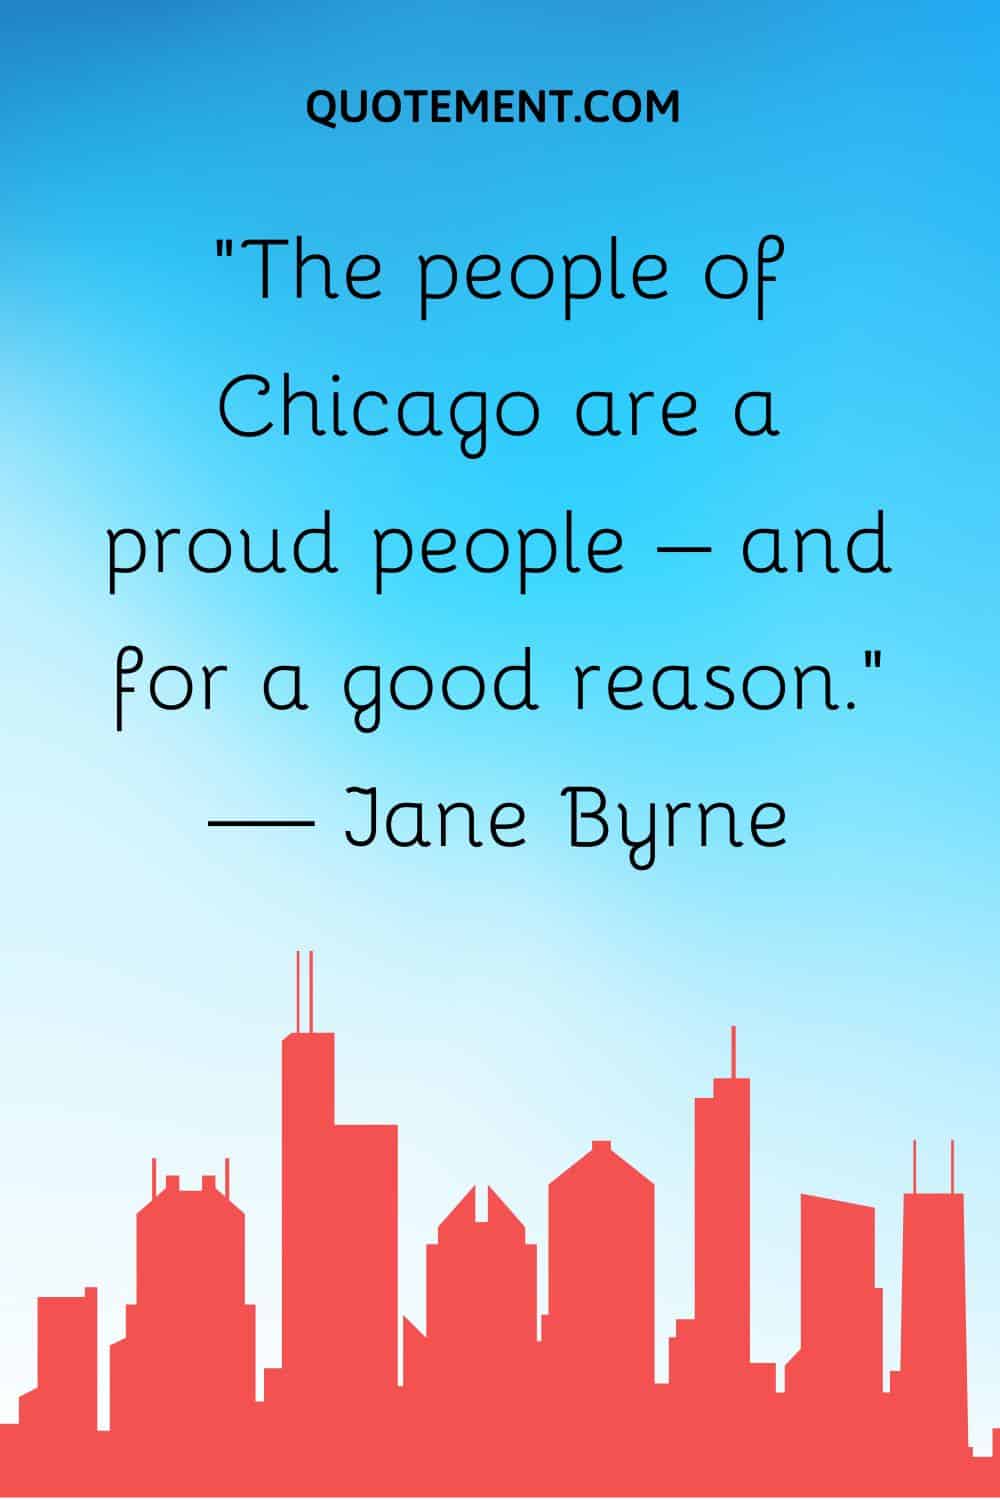 “The people of Chicago are a proud people – and for a good reason.” — Jane Byrne